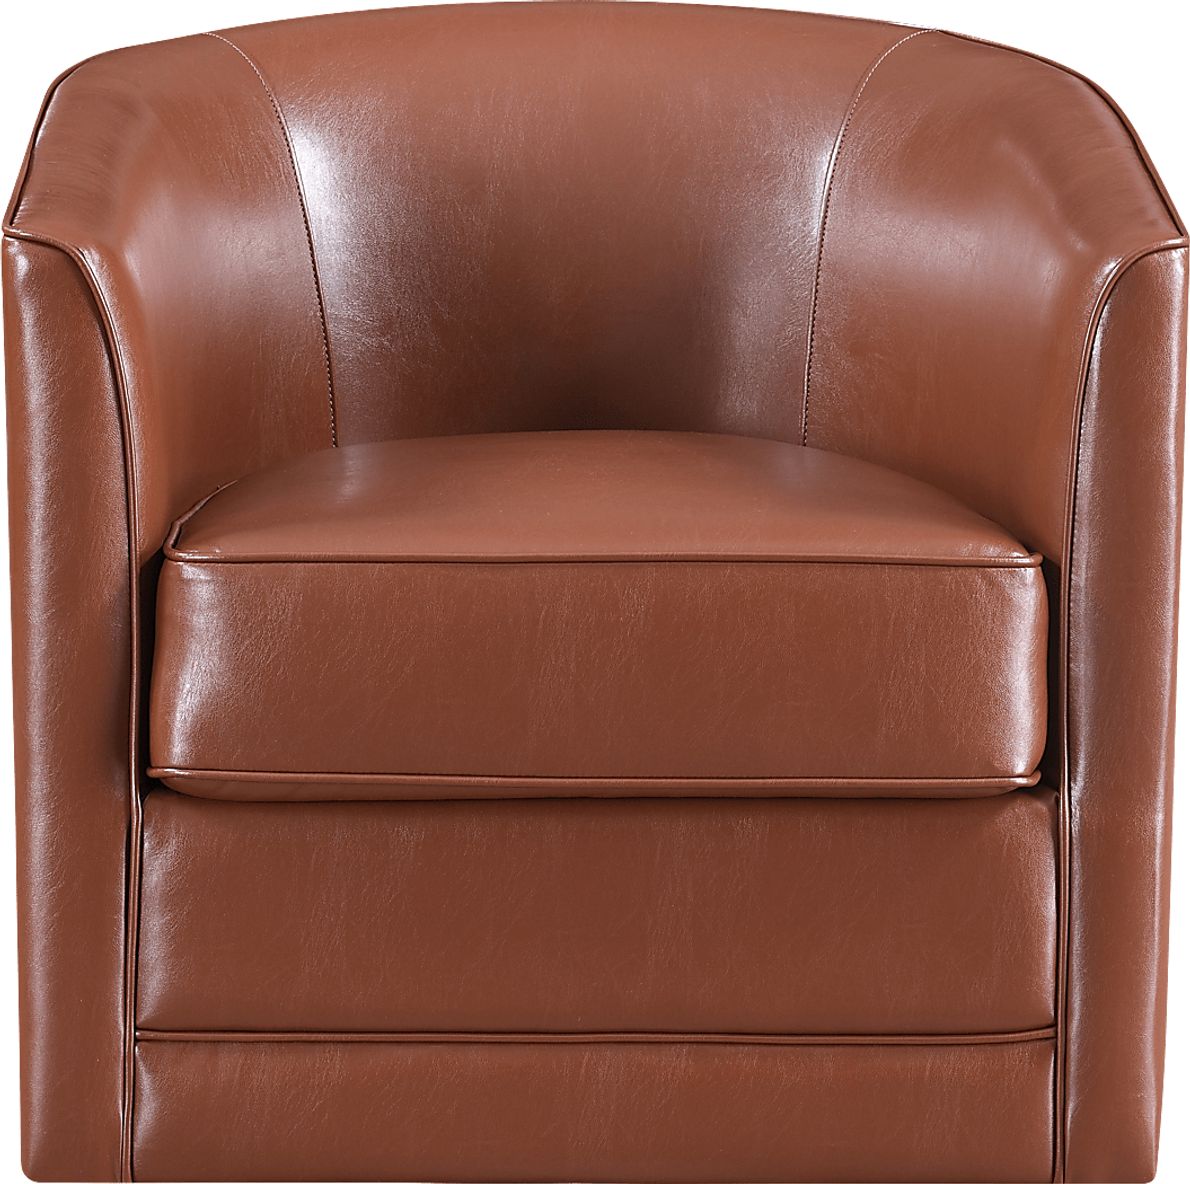 oversized swivel chair leather